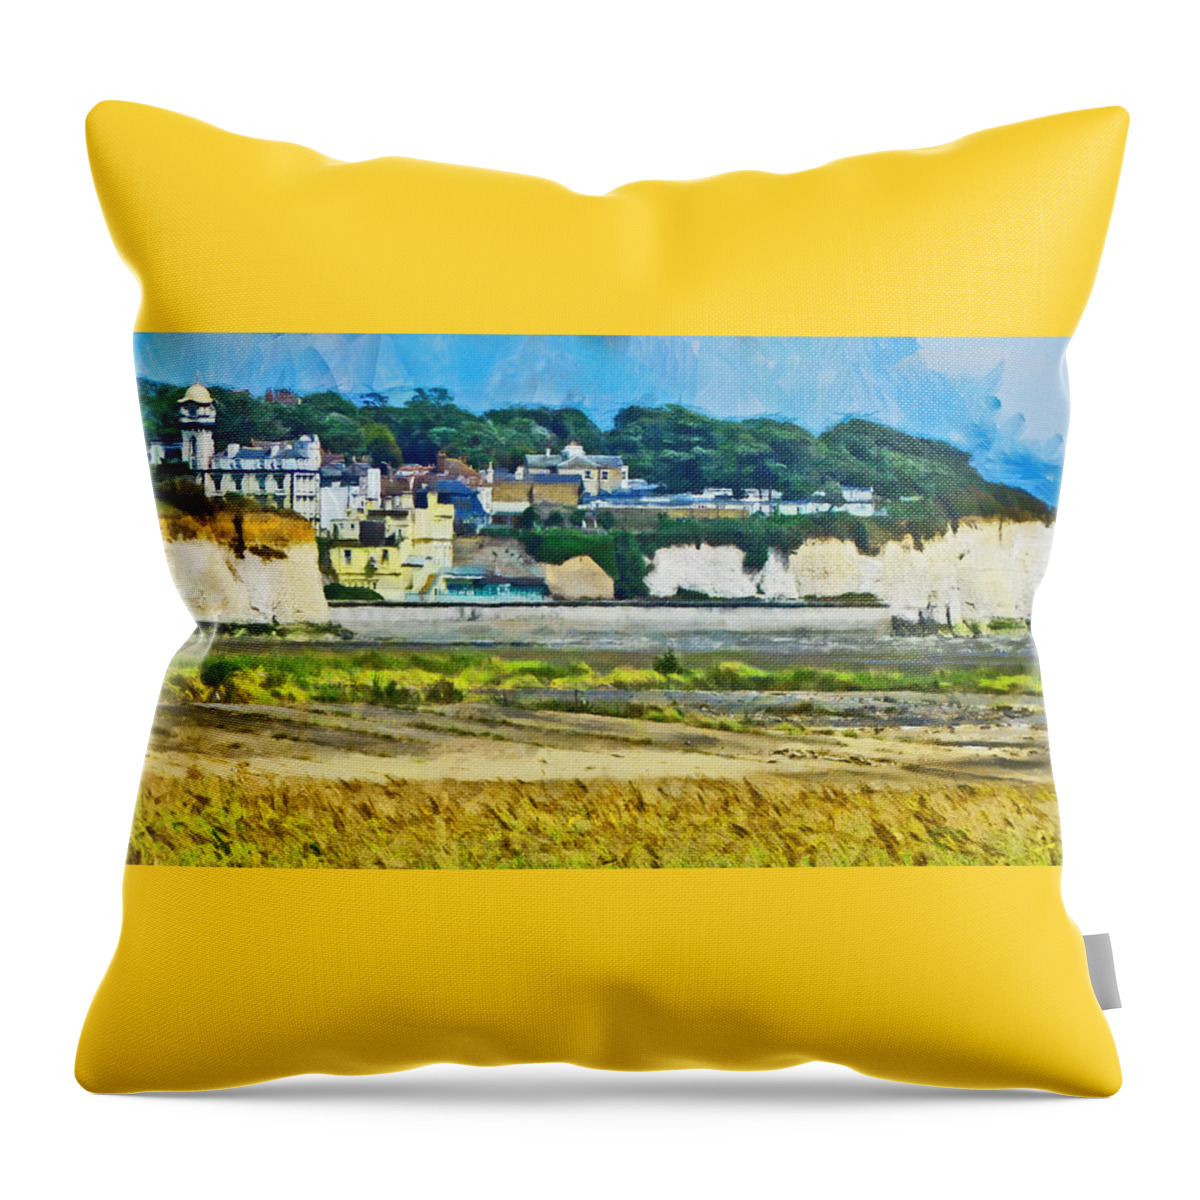 Pegwell Throw Pillow featuring the digital art Pegwell Bay by Steve Taylor